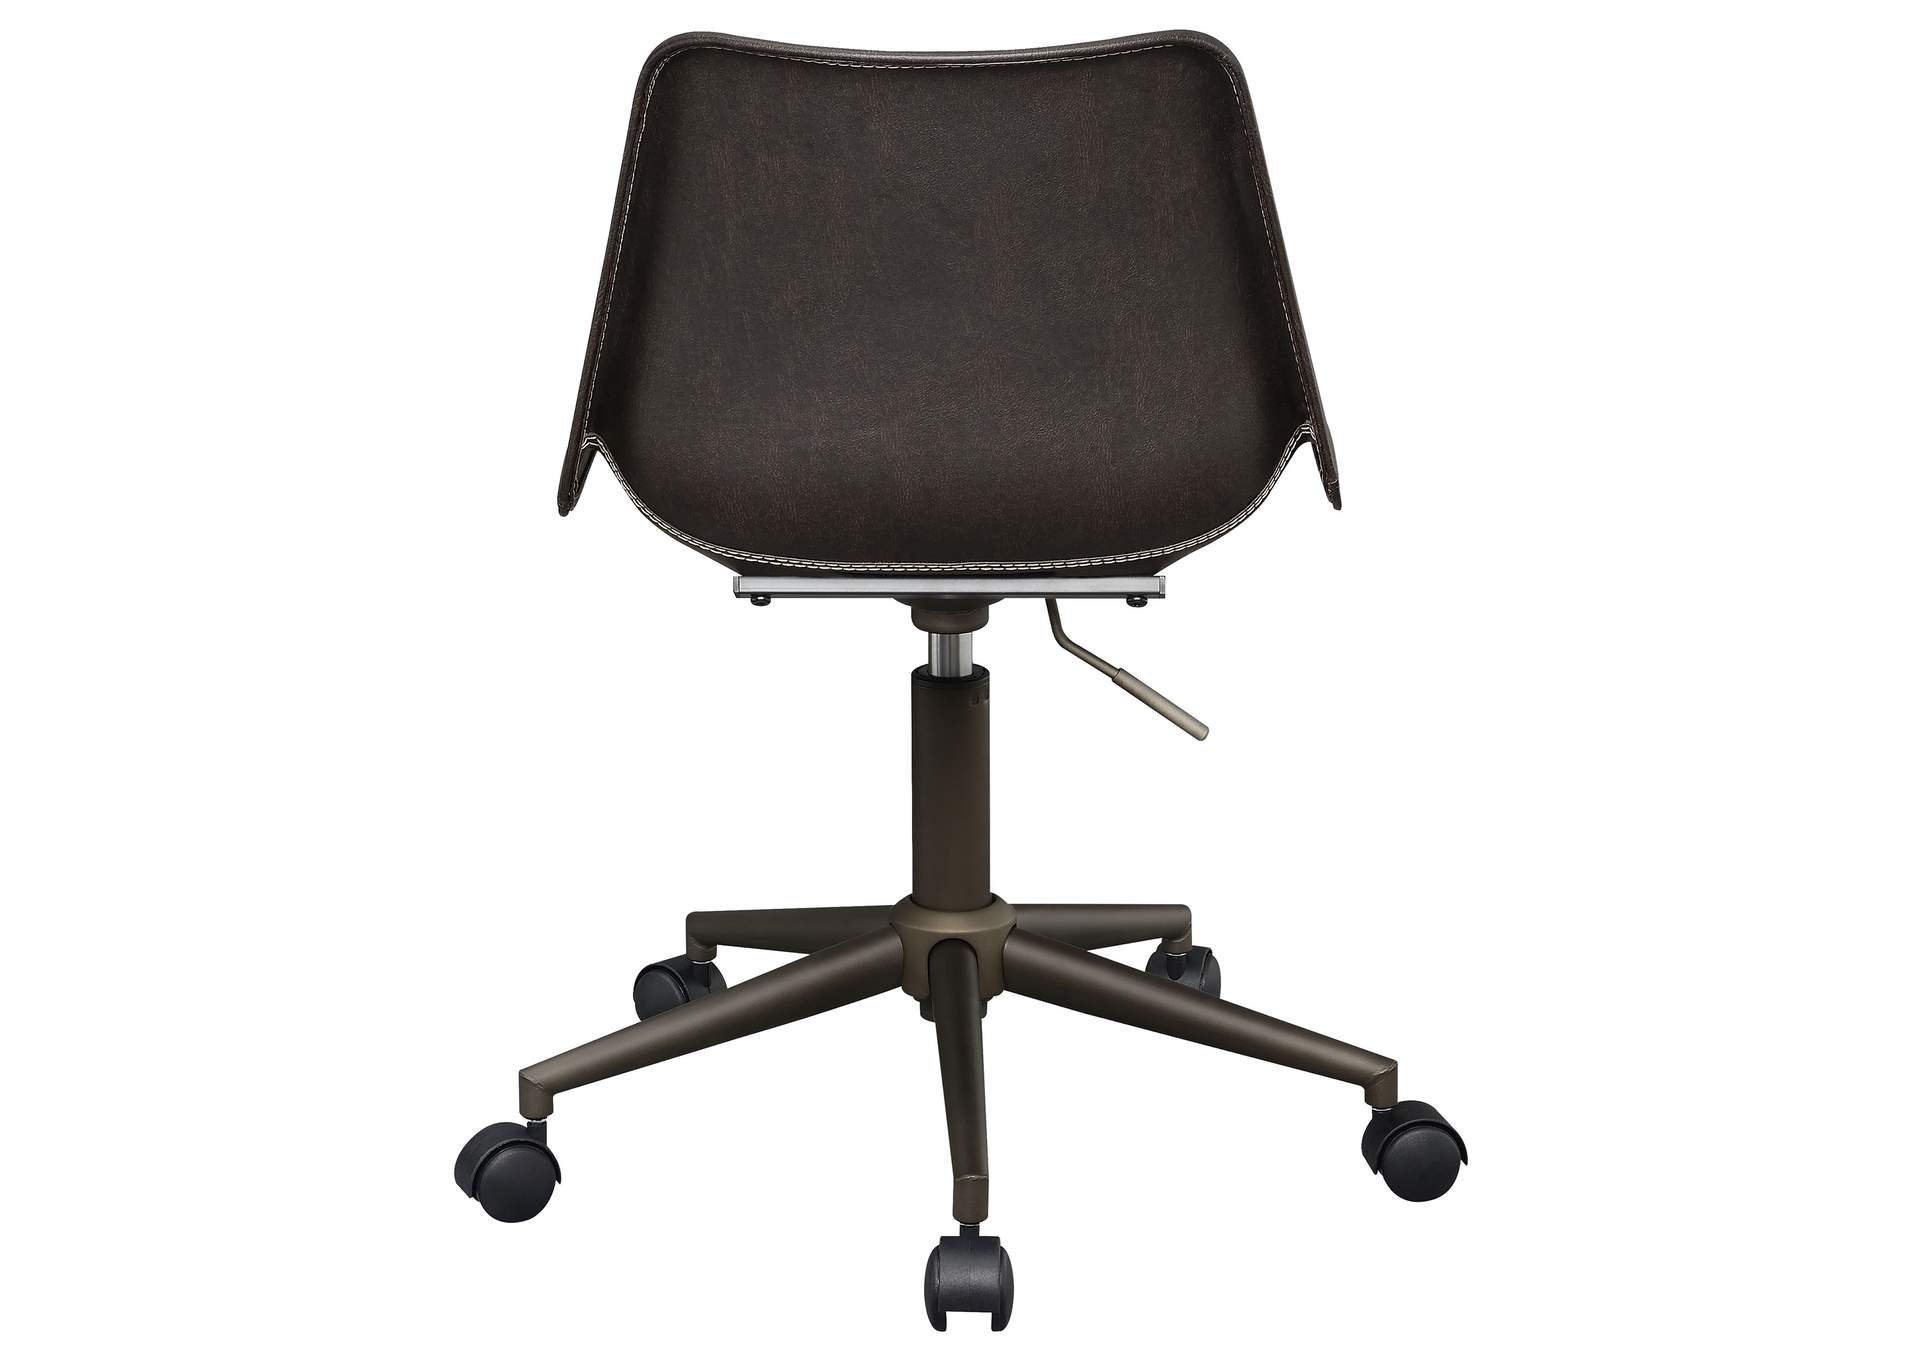 Carnell Adjustable Height Office Chair with Casters Brown and Rustic Taupe,Coaster Furniture